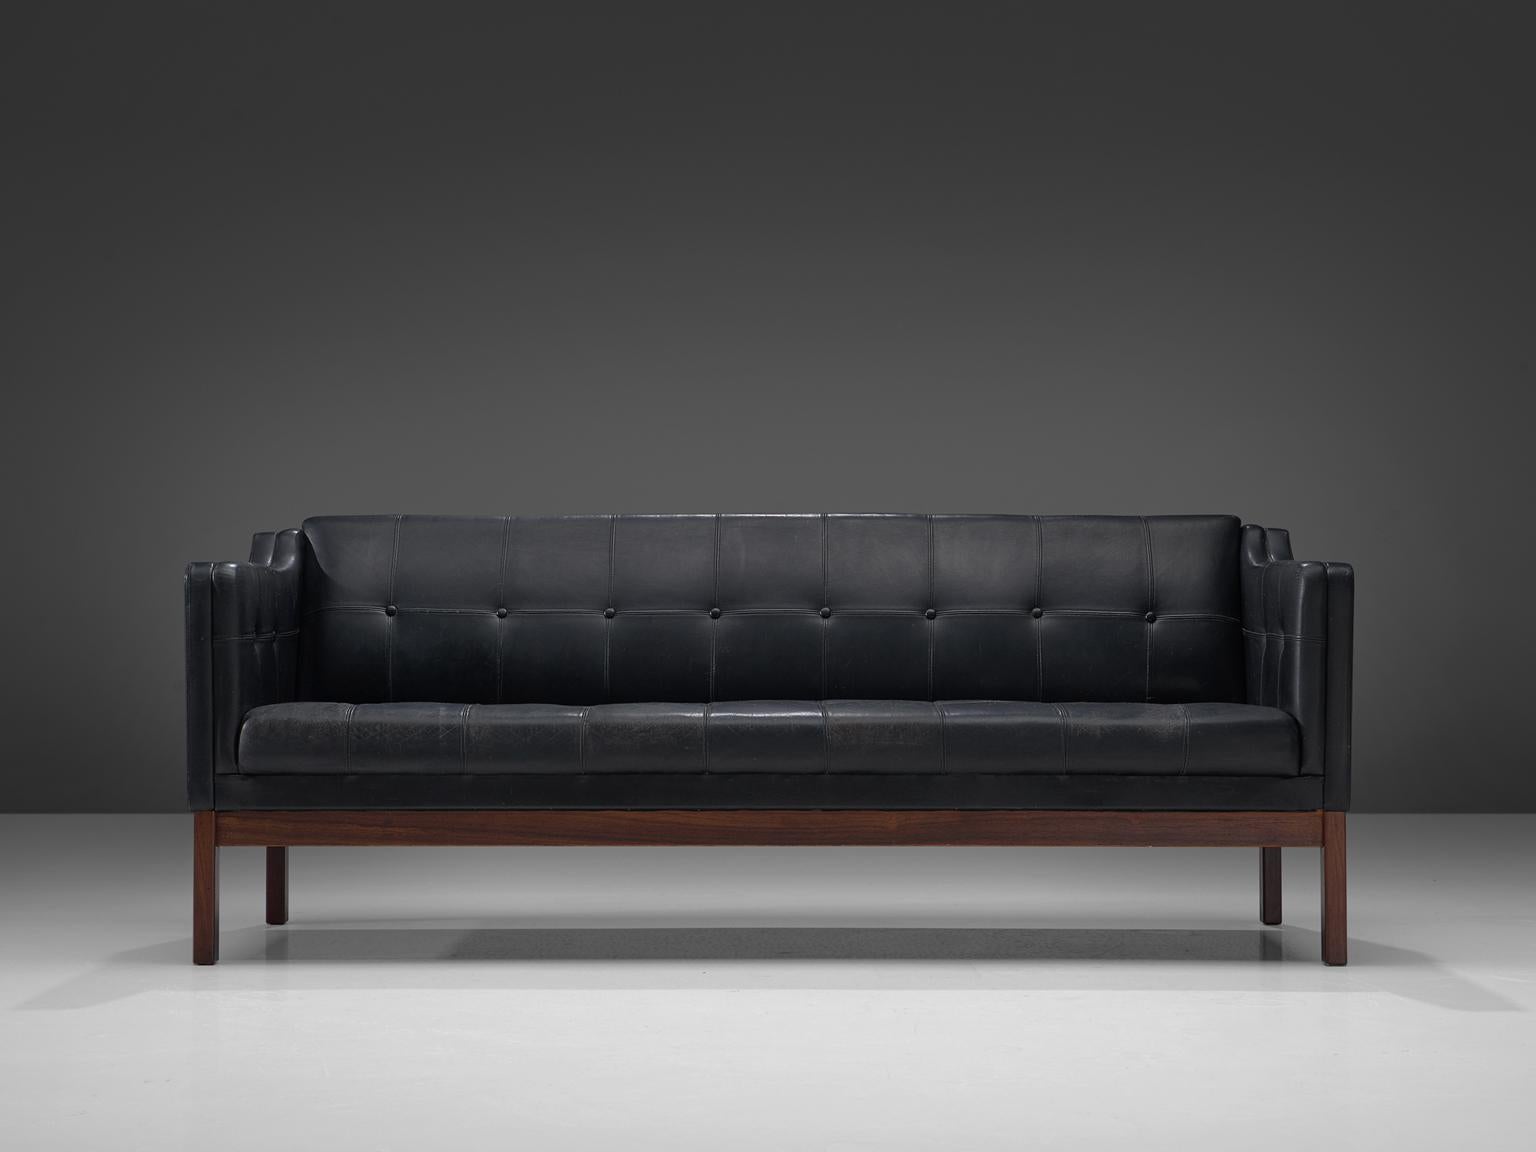 Pastoe, three-seat sofa, leather and rosewood, The Netherlands, 1960s

Elegant sofa manufactured by Pastoe in the 1960s. The rosewood frame holds a black leather buttoned body. The sofa features a well balanced design, showing strong influences of